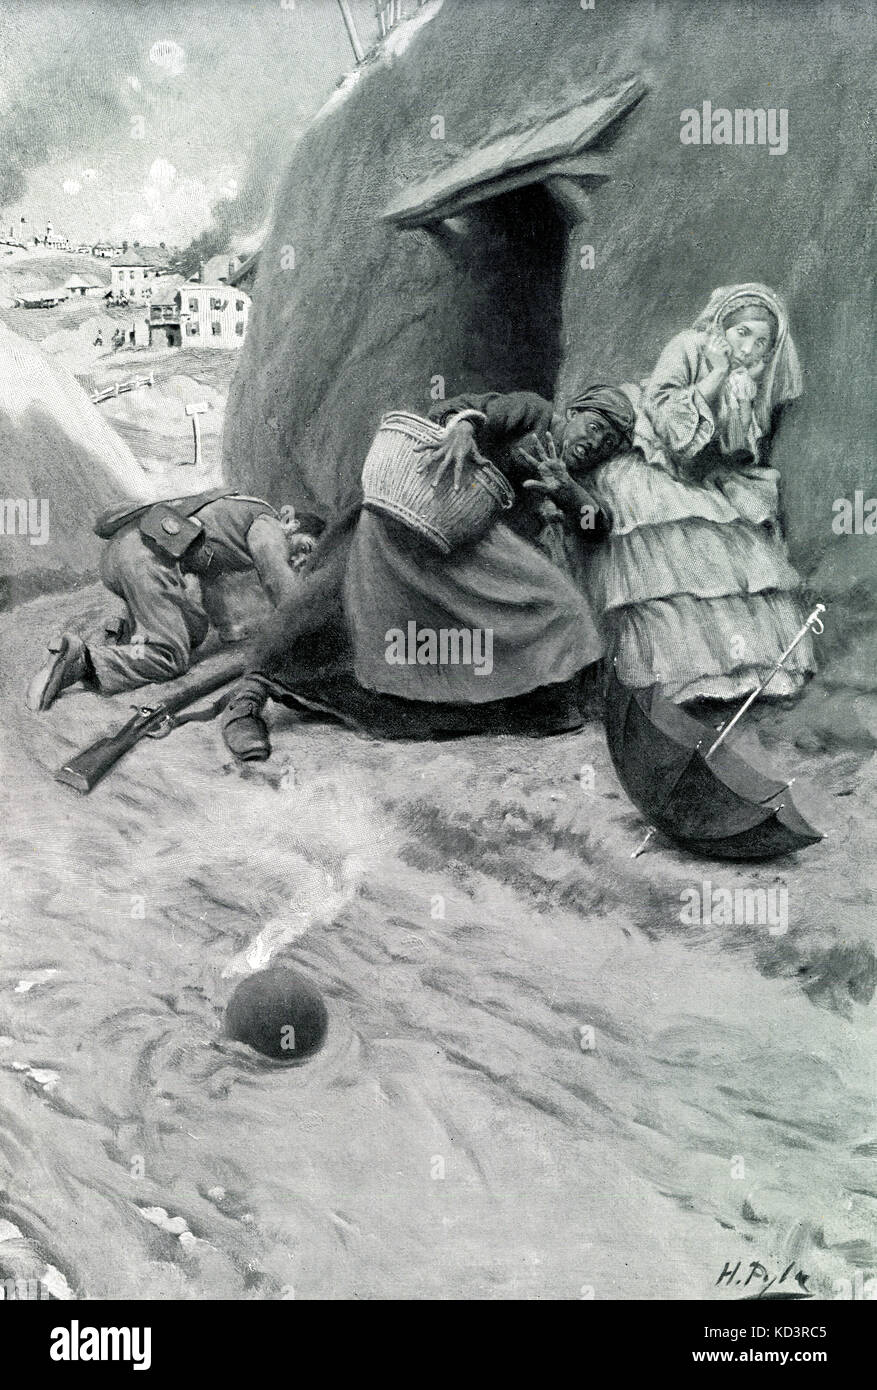 Siege of Vicksburg, Vicksburg Campaign, 1863. American Civil War. Non-combattant citizens of Vicksburg sheltering in caves dug into the hillside narrowly escape shell fire. Illustration by Howard Pyle, 1909 Stock Photo